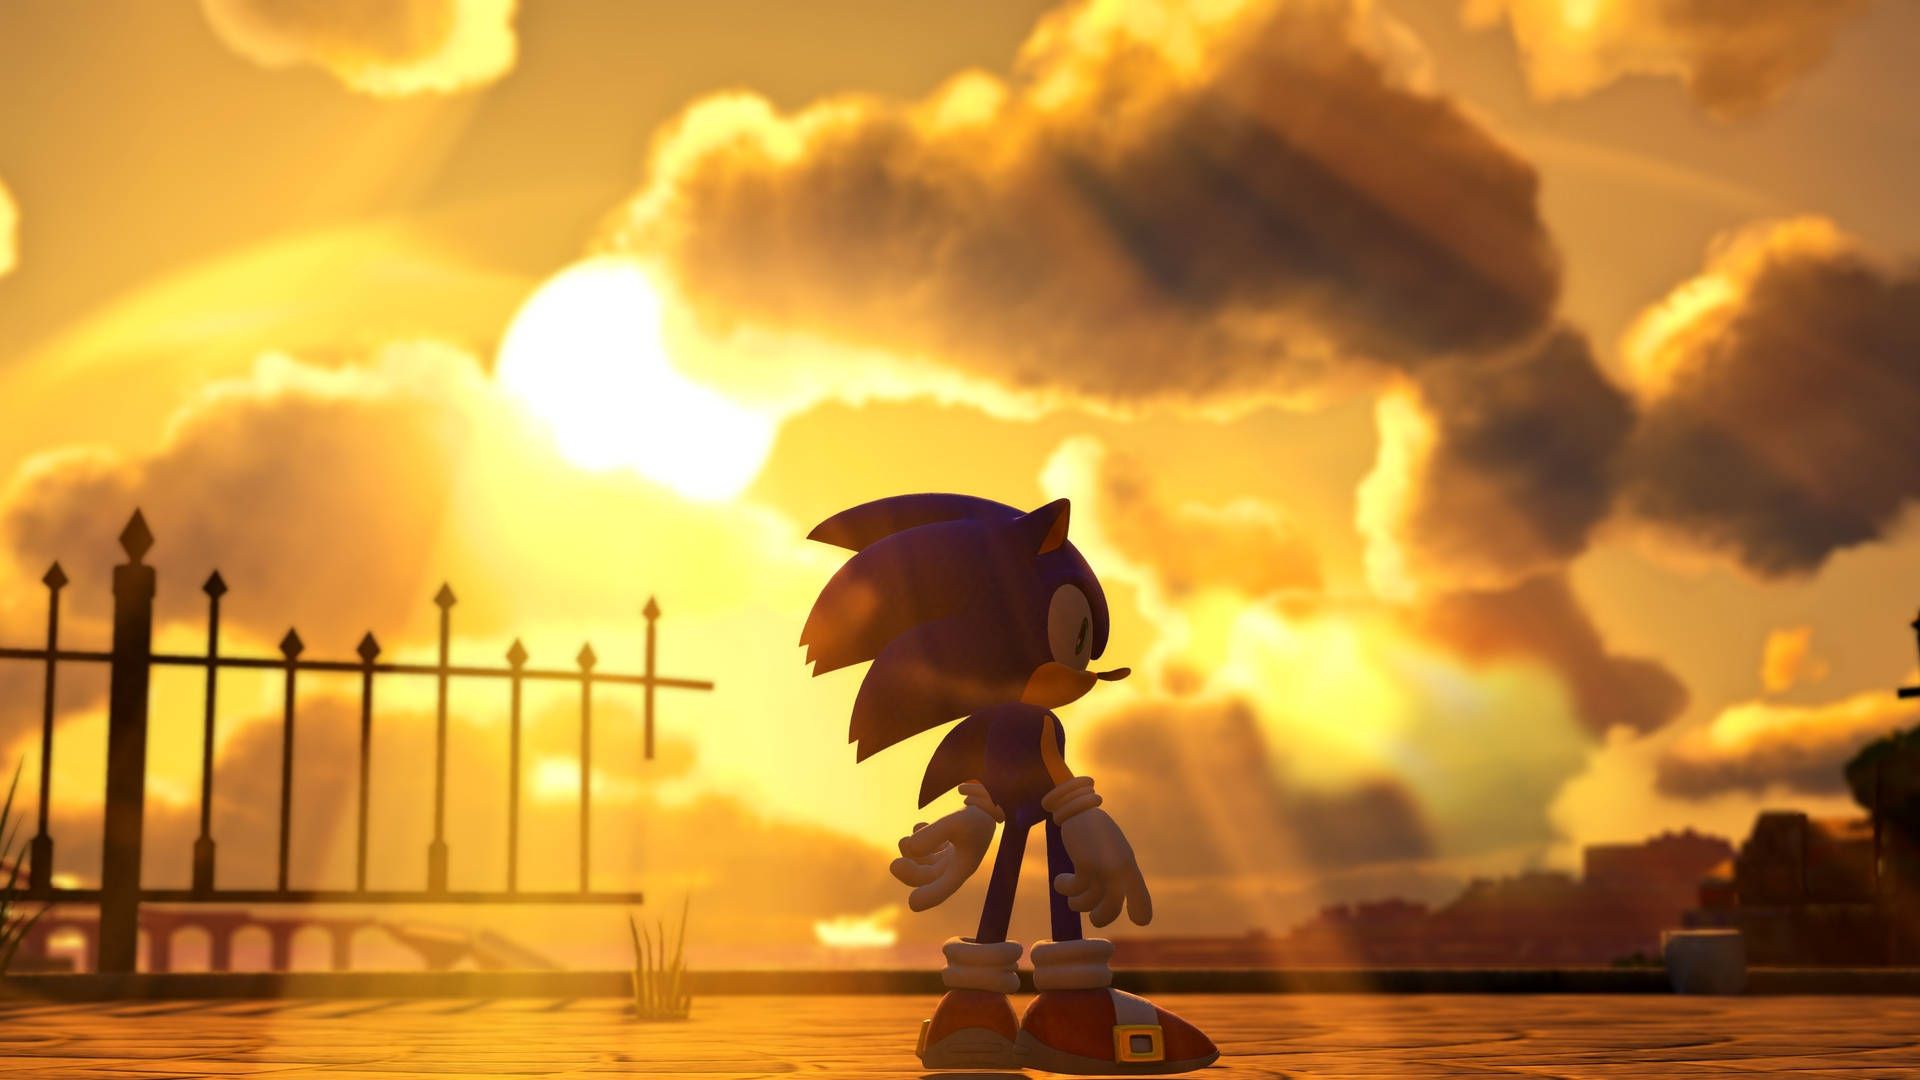 Cool Sonic Picture for FREE